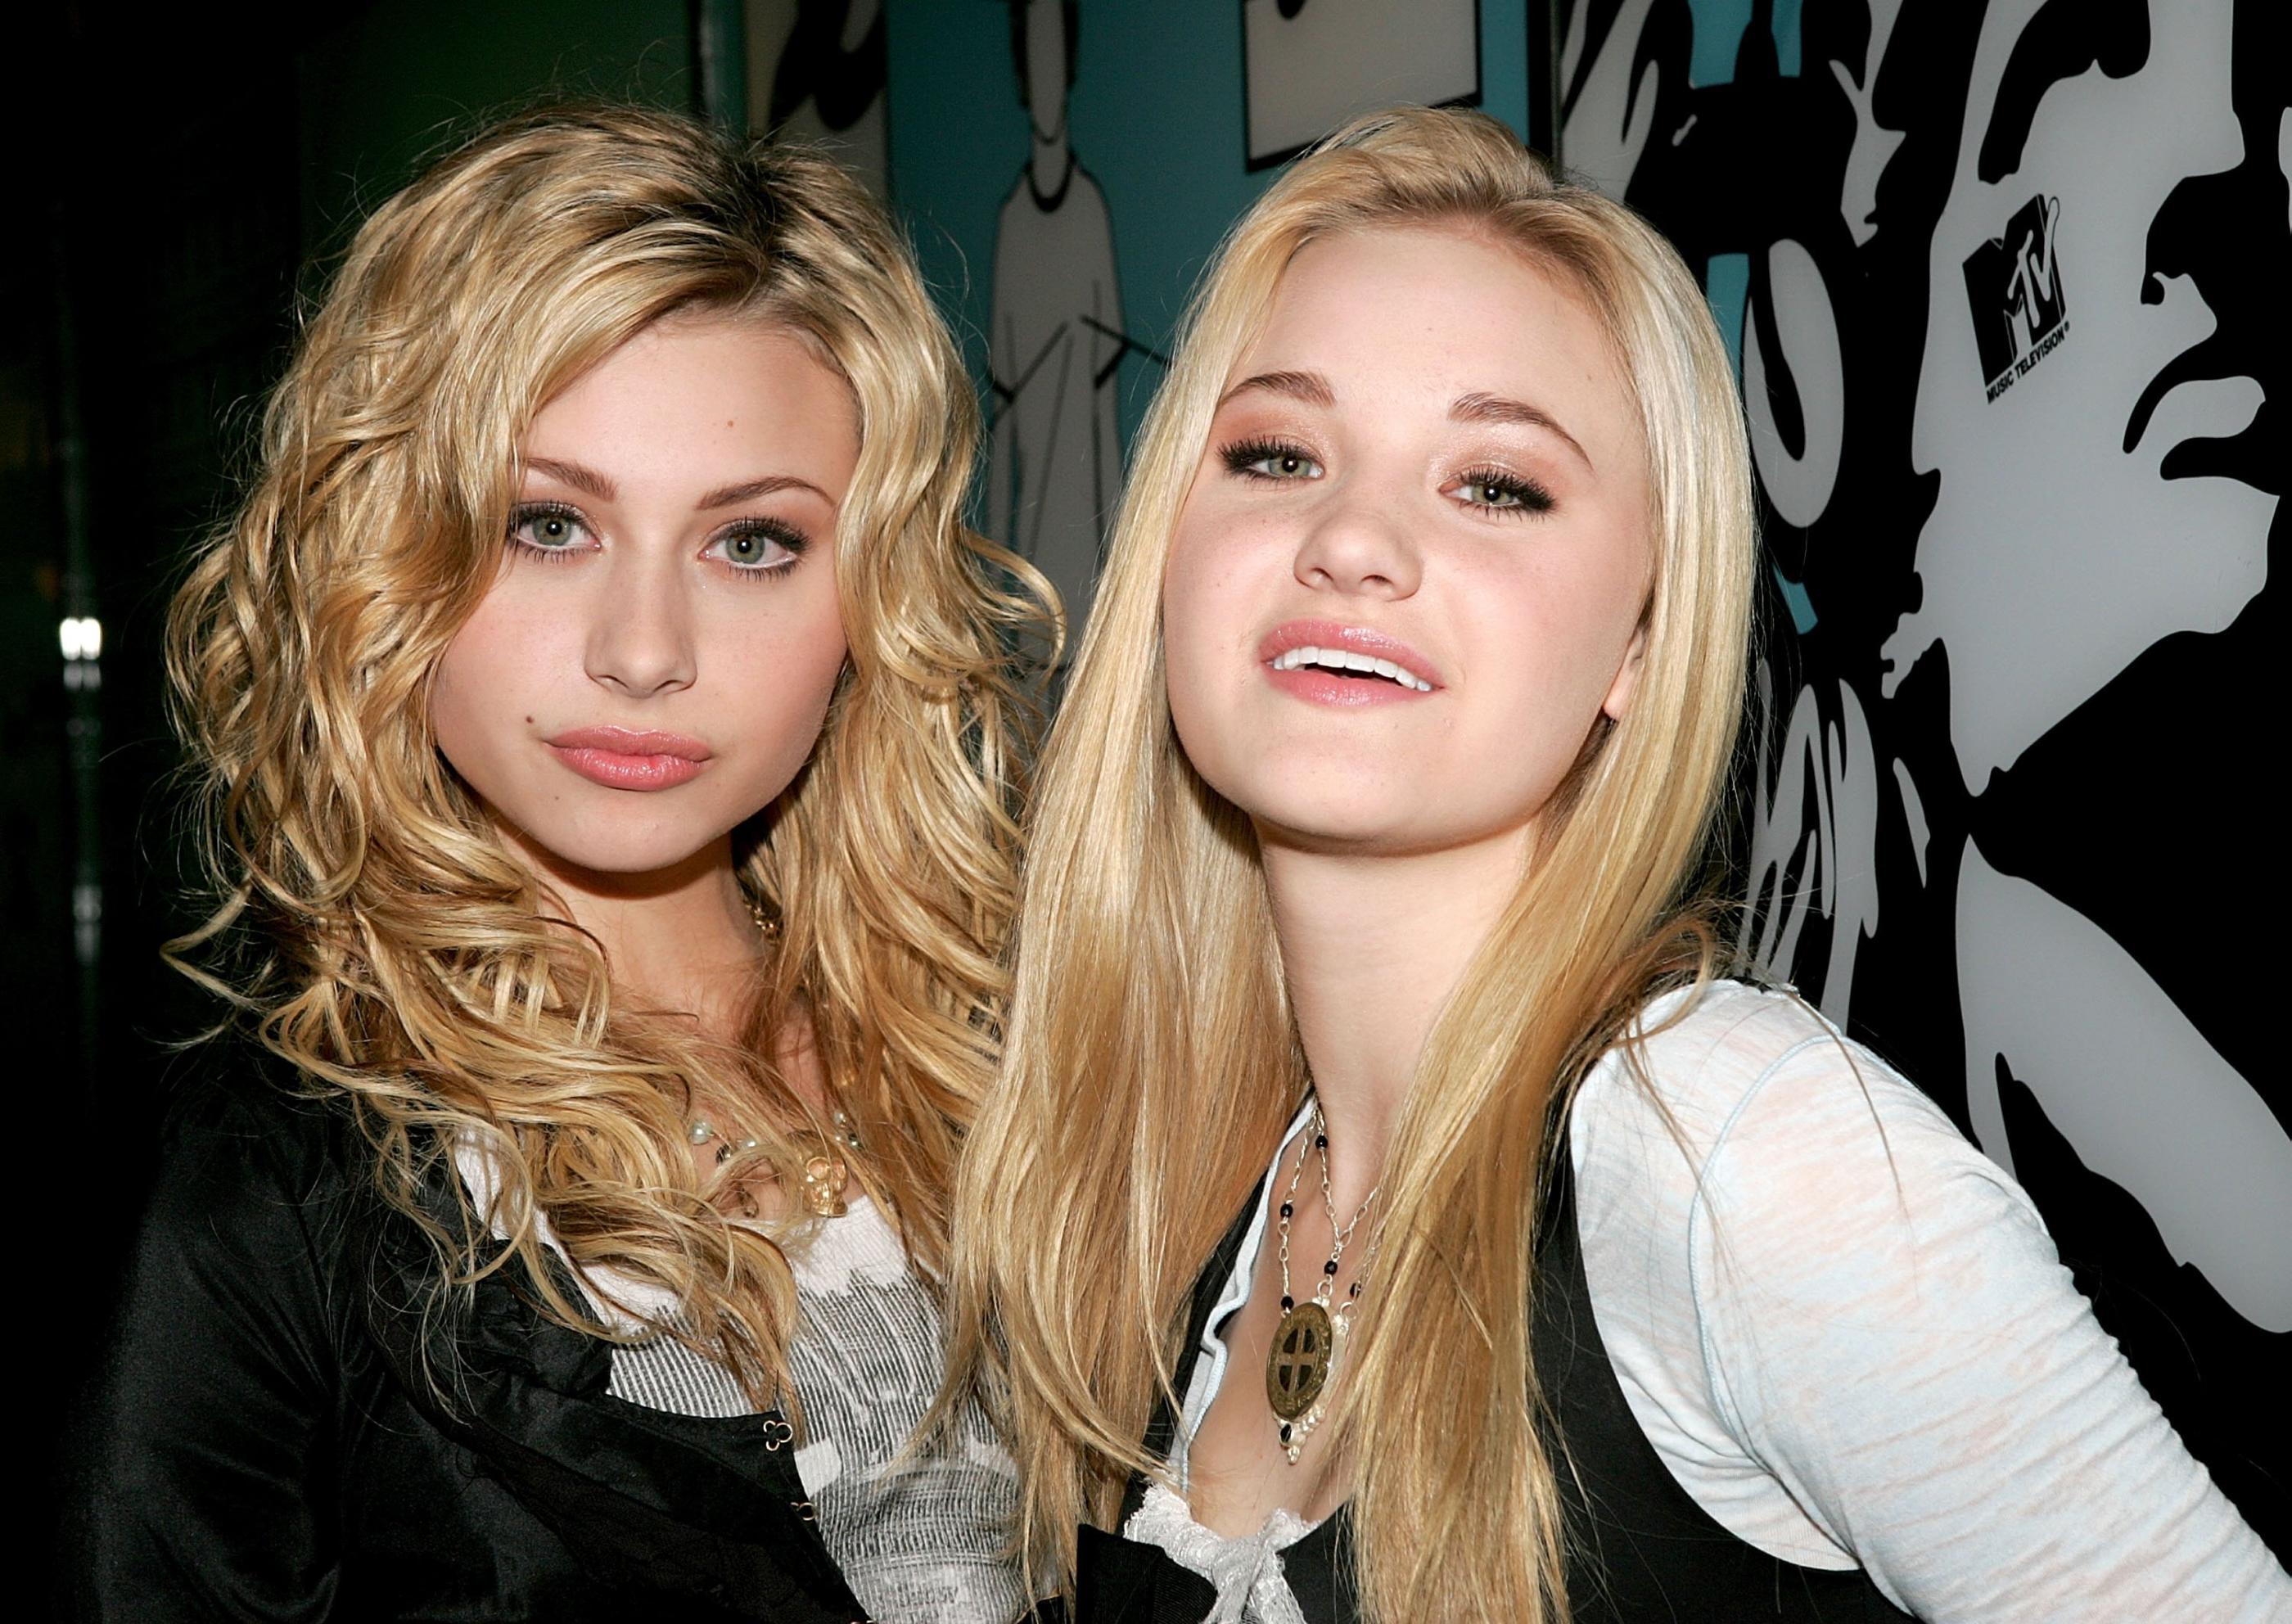 Aly and Aj photo #341178.